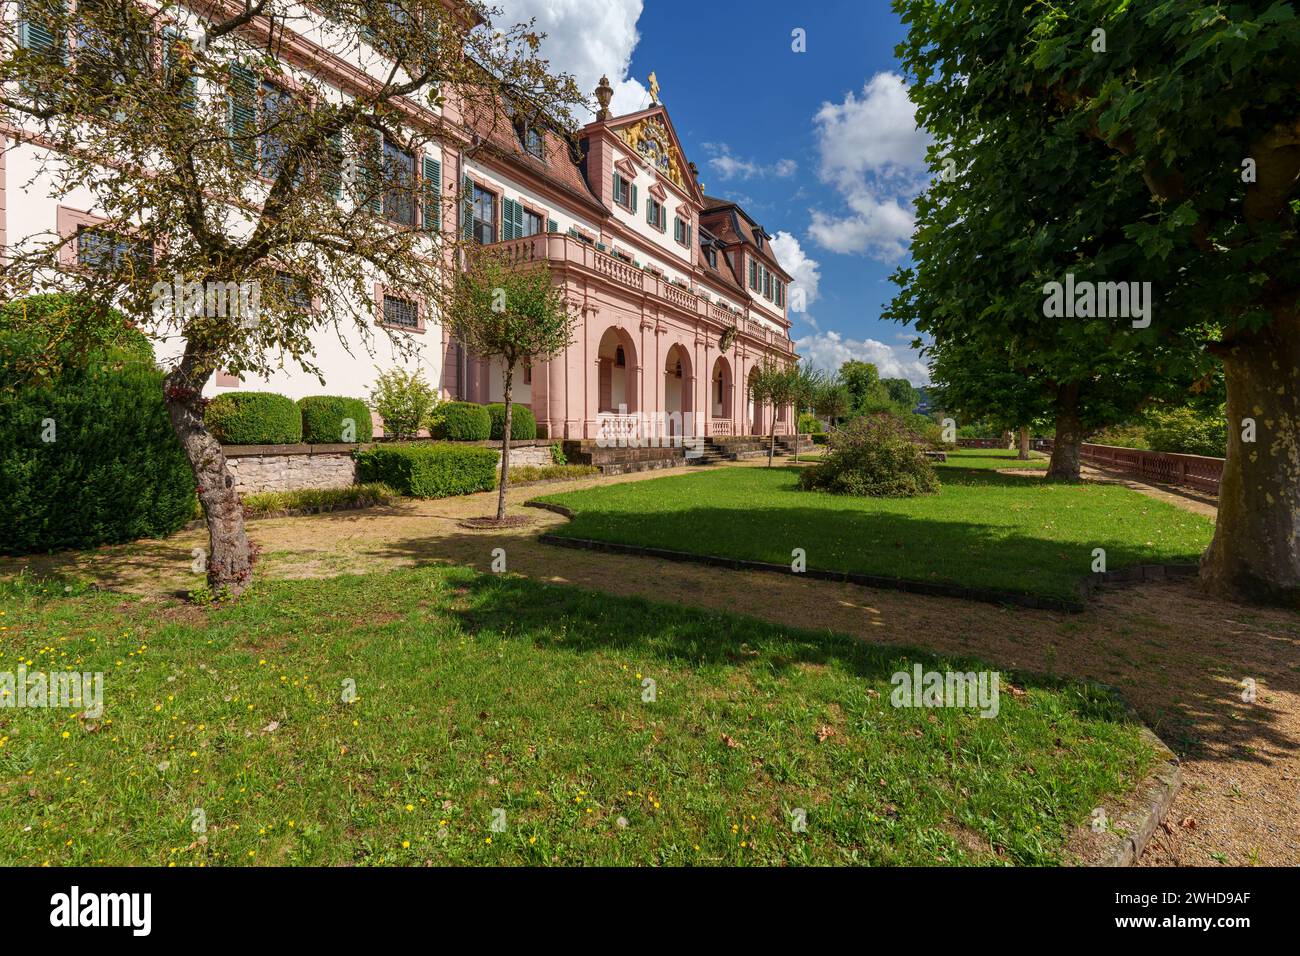 Castle garden at the Kellereischloss or Red Castle in the wine town of Hammelburg, Bad Kissingen district, Lower Franconia, Franconia, Bavaria, Germany Stock Photo